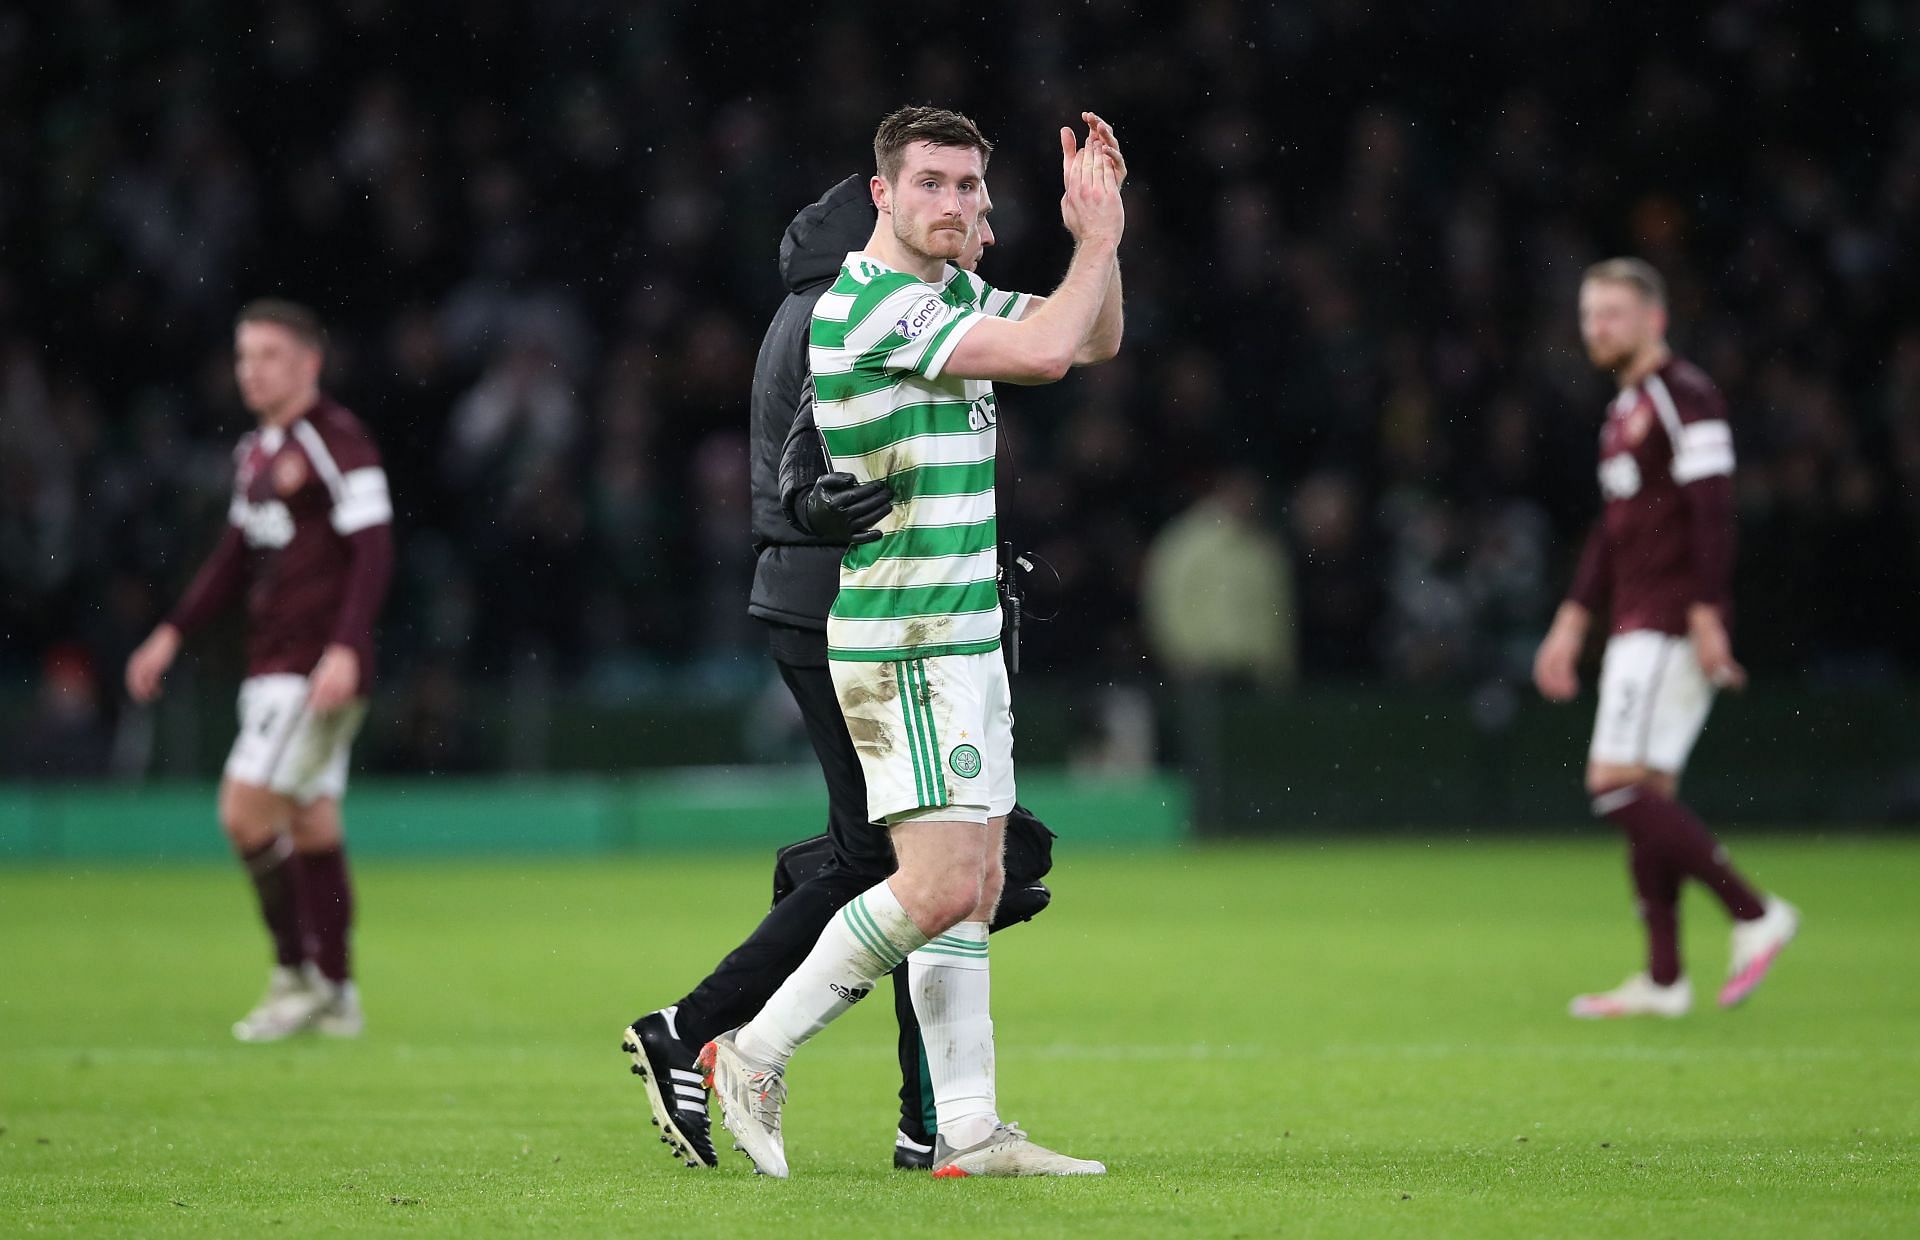 Celtic face Hearts in the Scottish Premiership on Wednesday